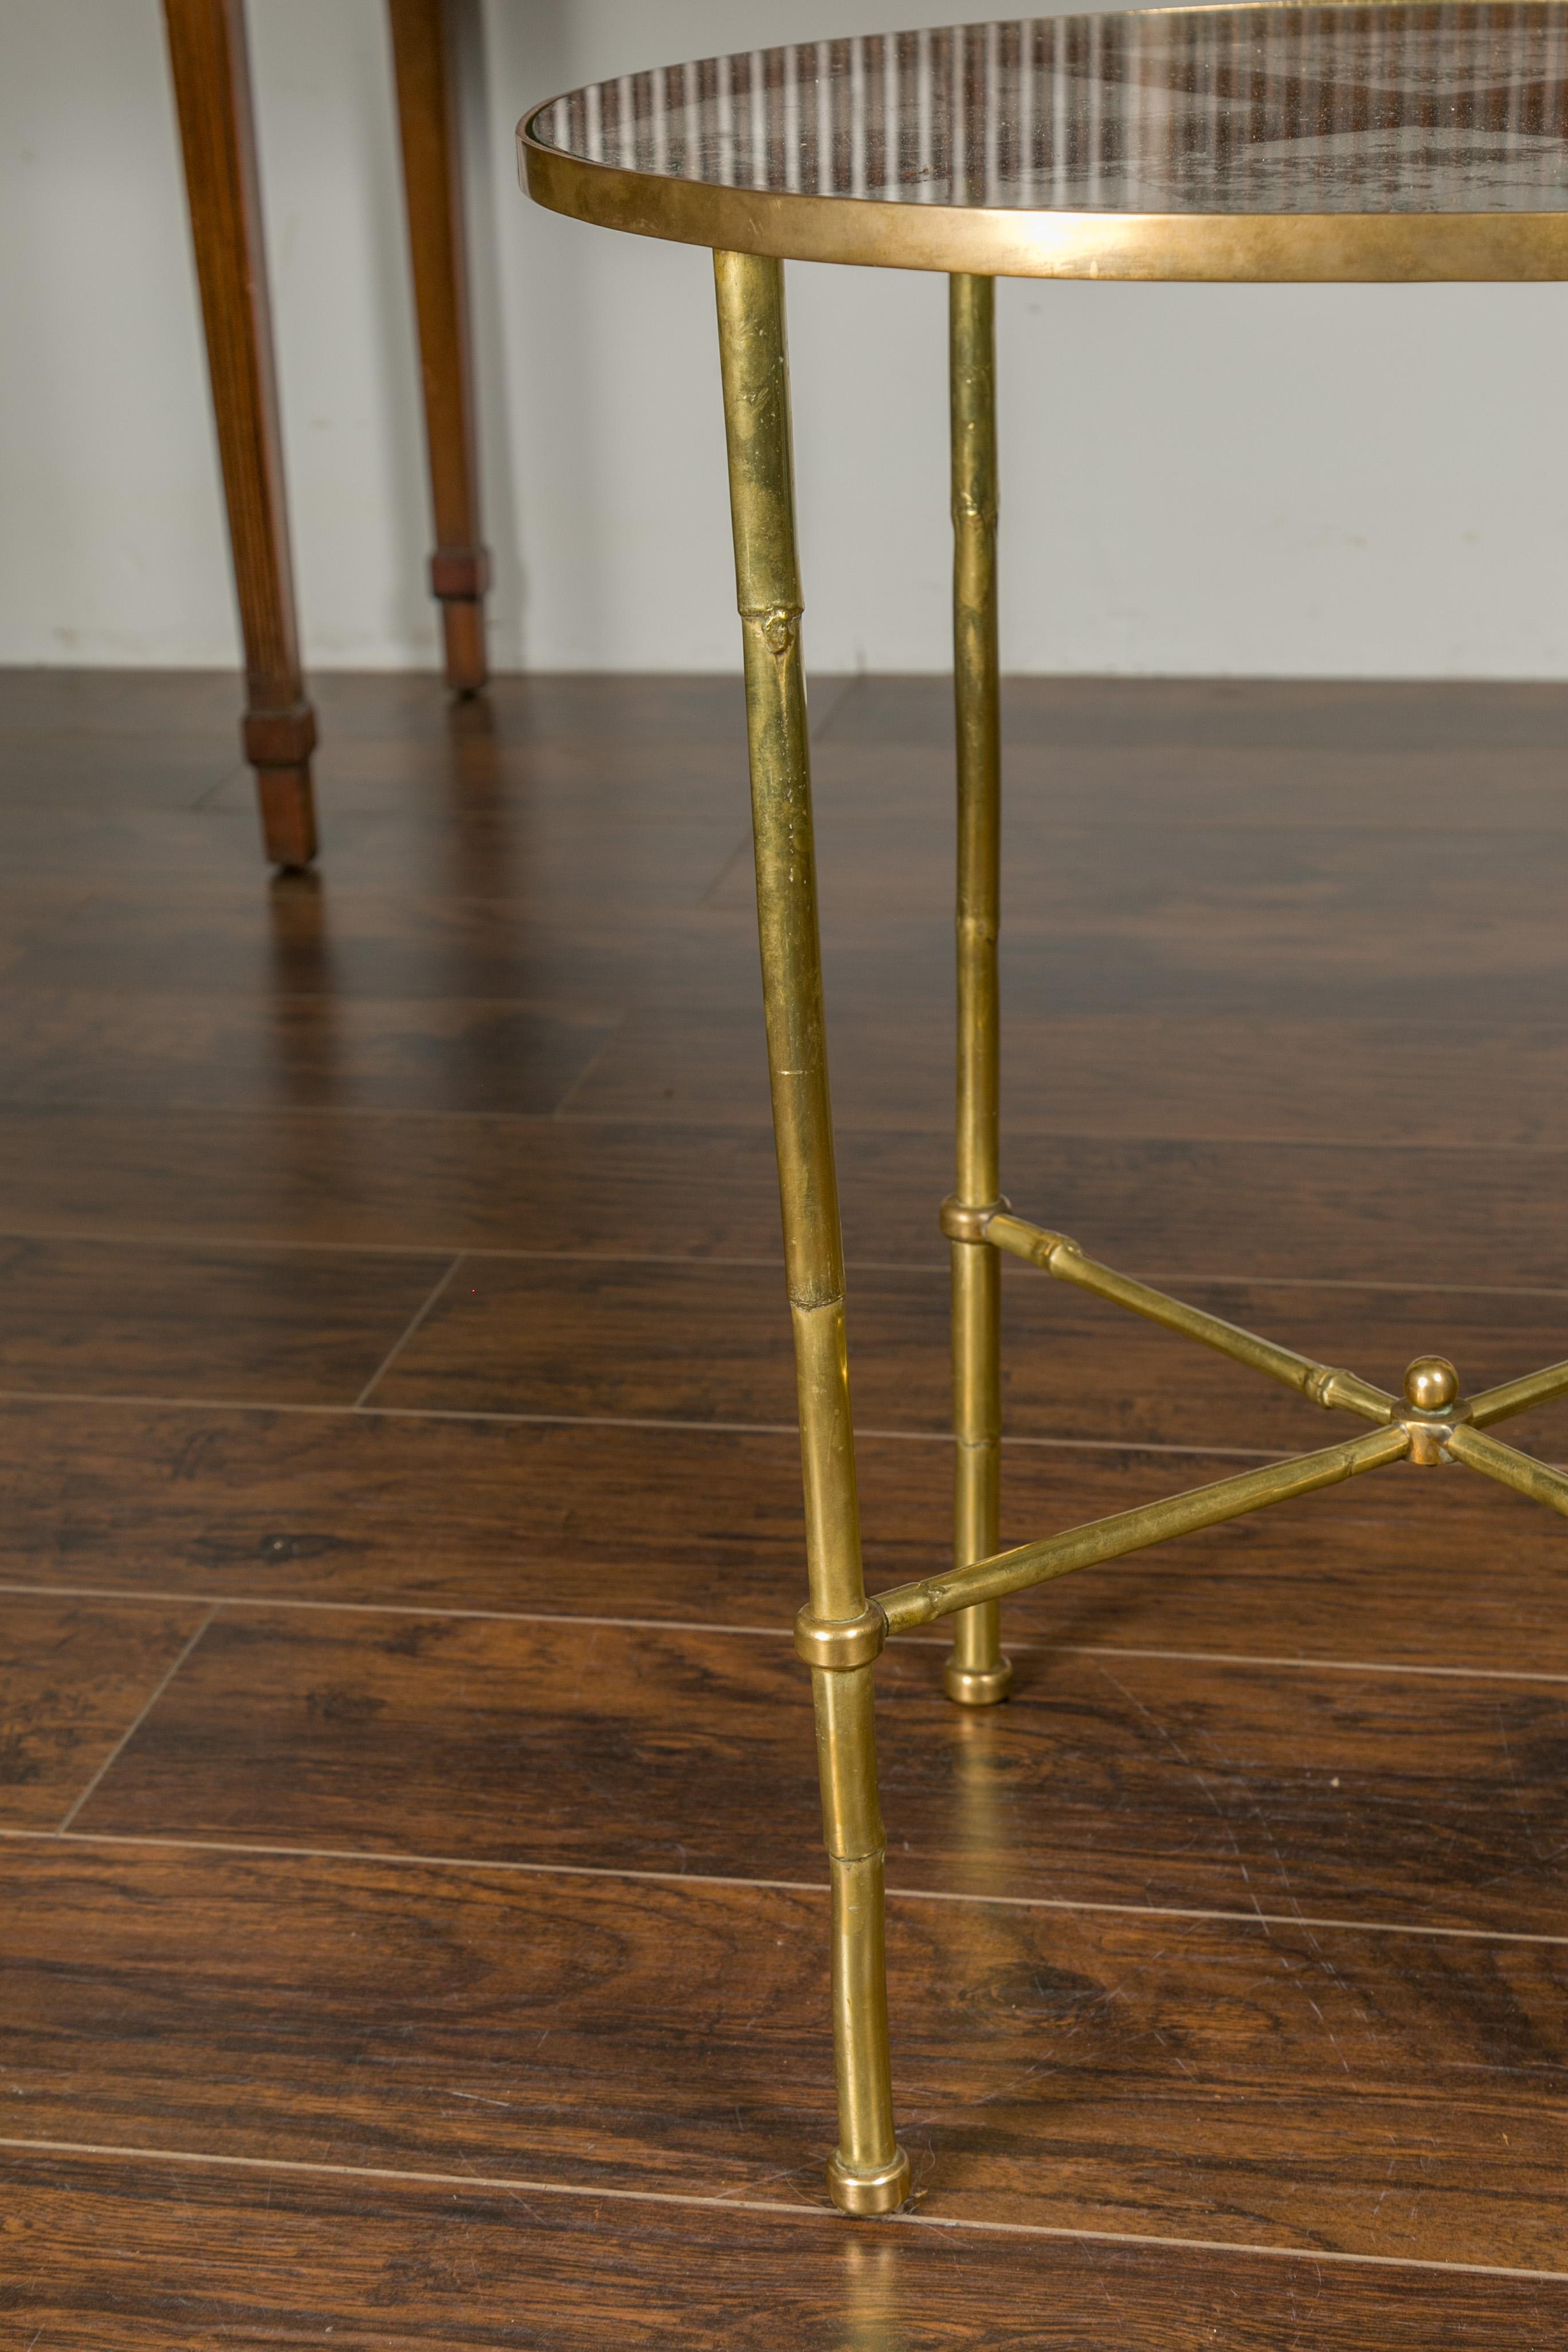 Italian Midcentury Brass Bamboo-Inspired Side Table with Distressed Glass Top For Sale 2